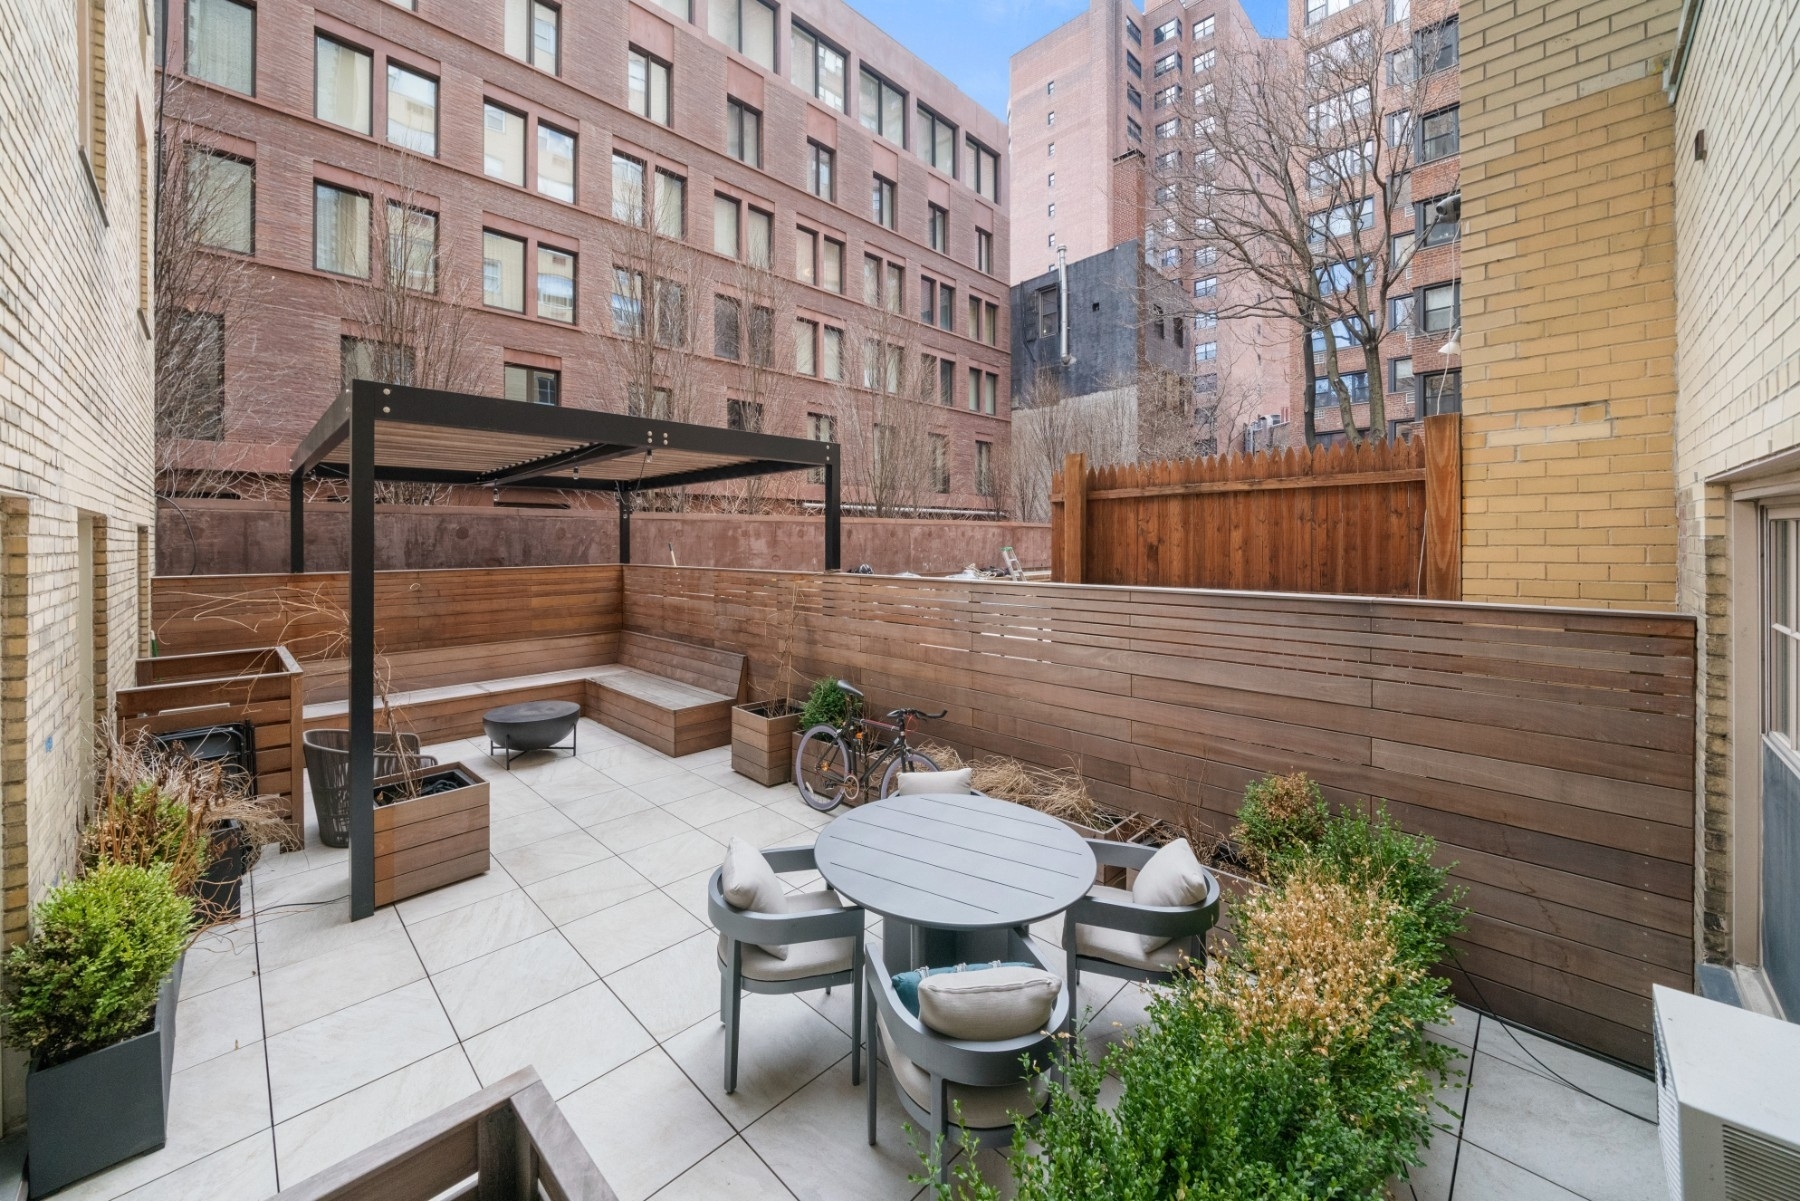 Co-op Properties for Sale at 2 HORATIO ST, 1L West Village, New York, New York 10014